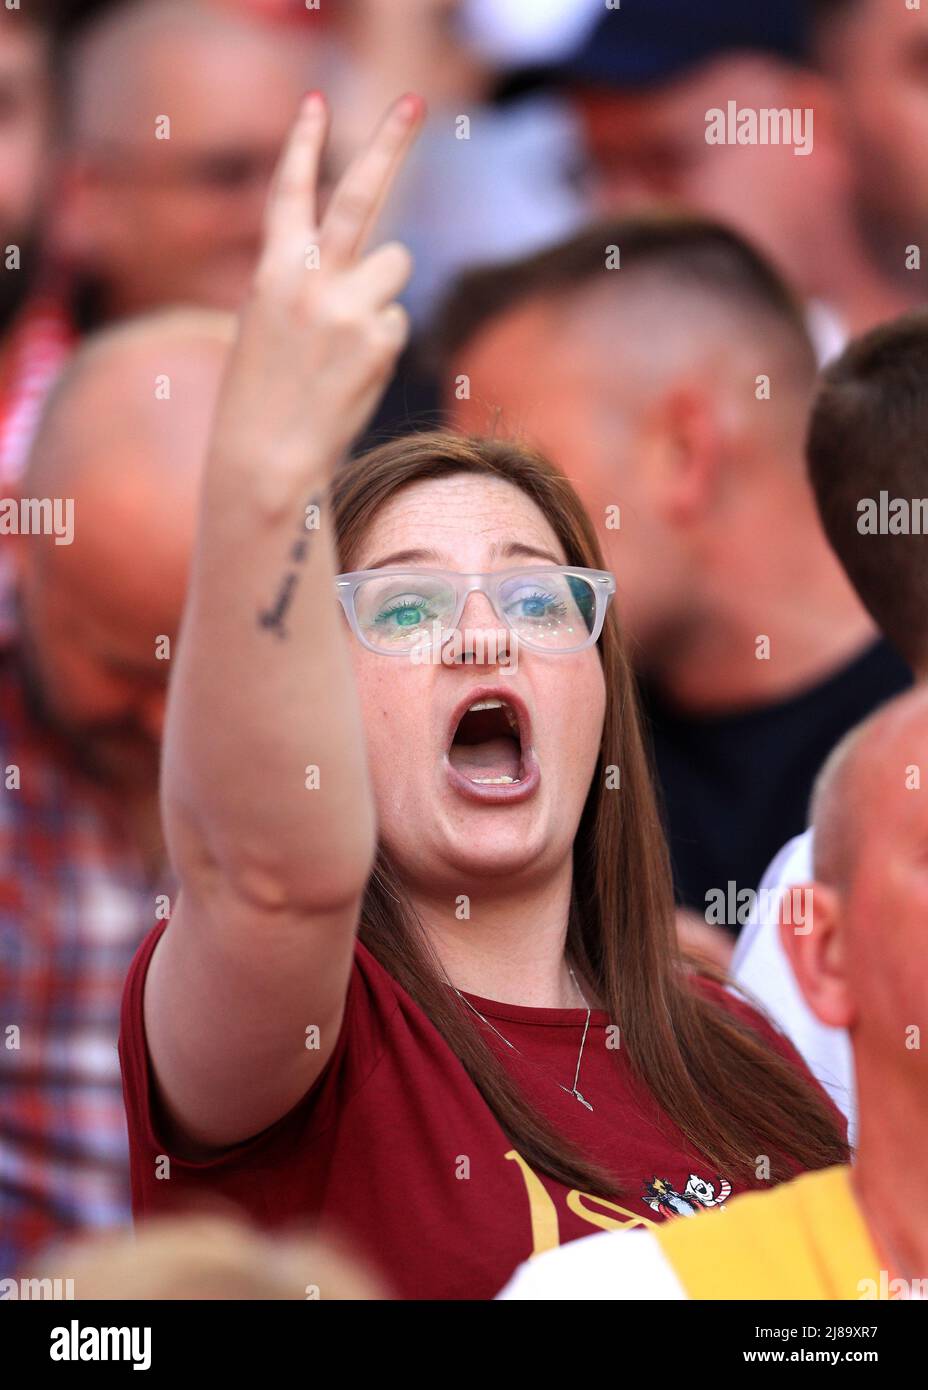 14th May 2022 ; Wembley Stadium, London England; FA Cup Final, Chelsea versus Liverpool: Liverpool fan gesturing rudely as the national anthem of the United Kingdom is played Stock Photo